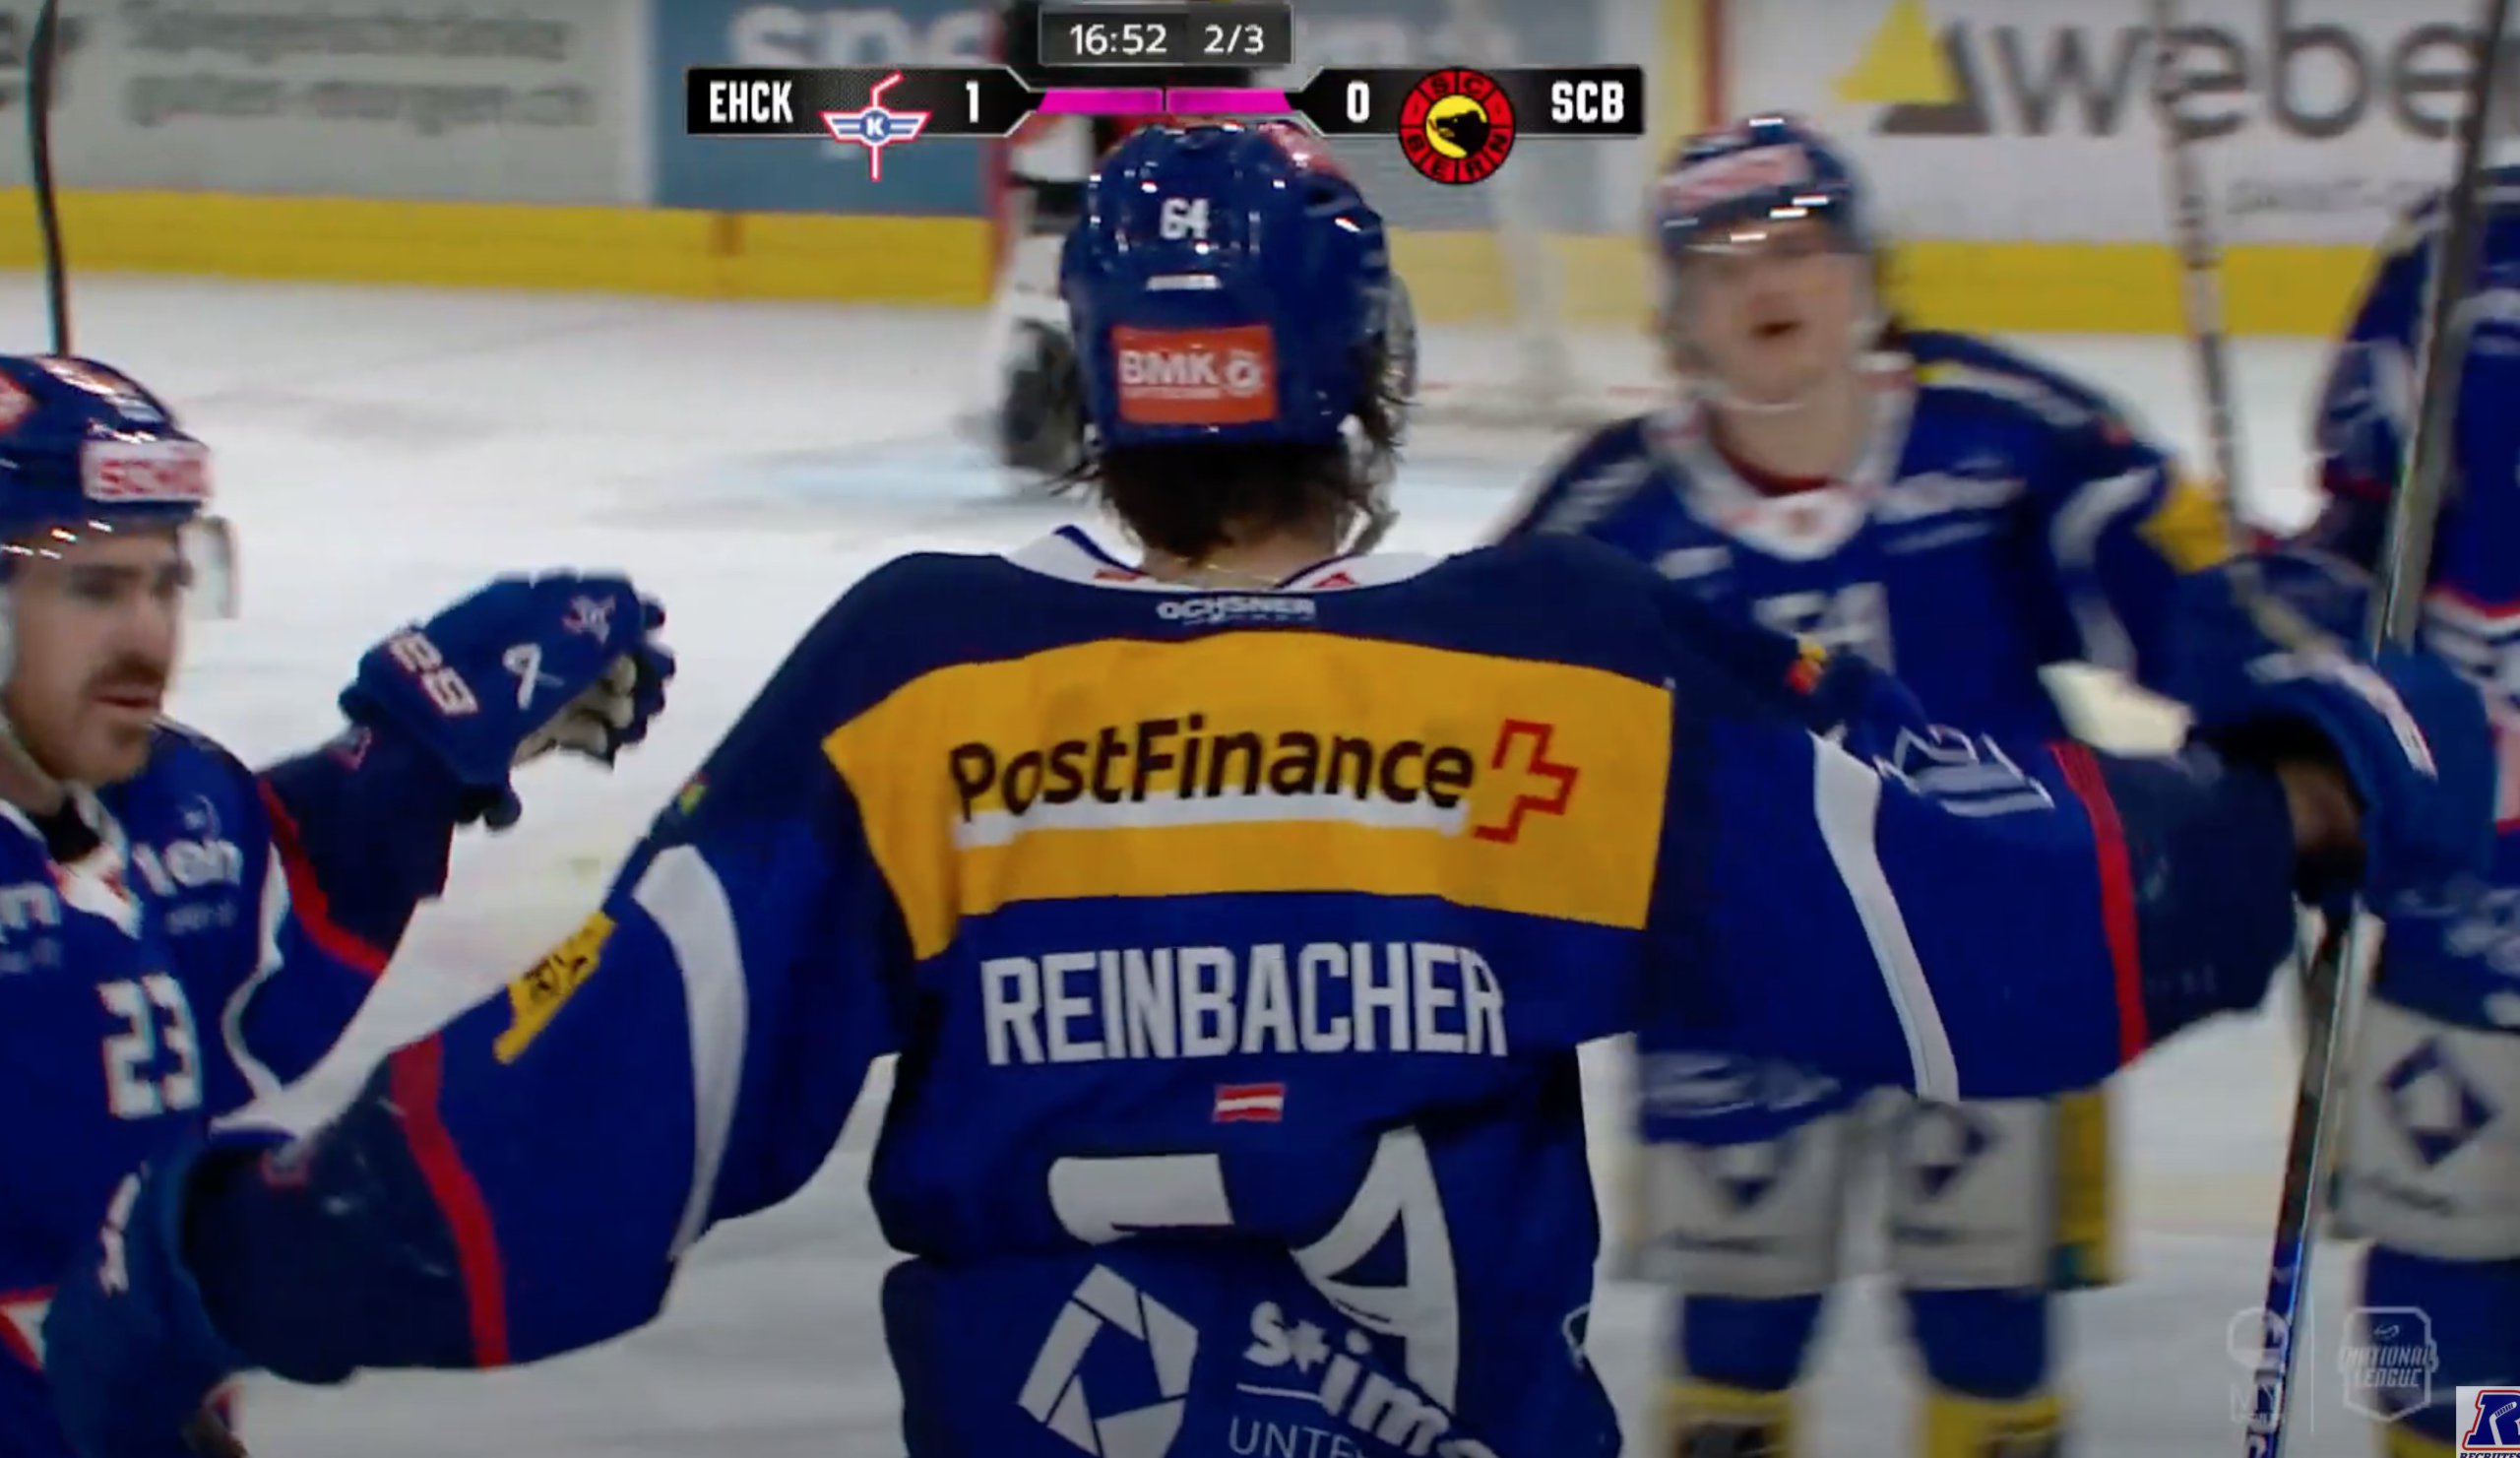 Defender David Reinbacher is increasingly linked with CH at number 5 pick